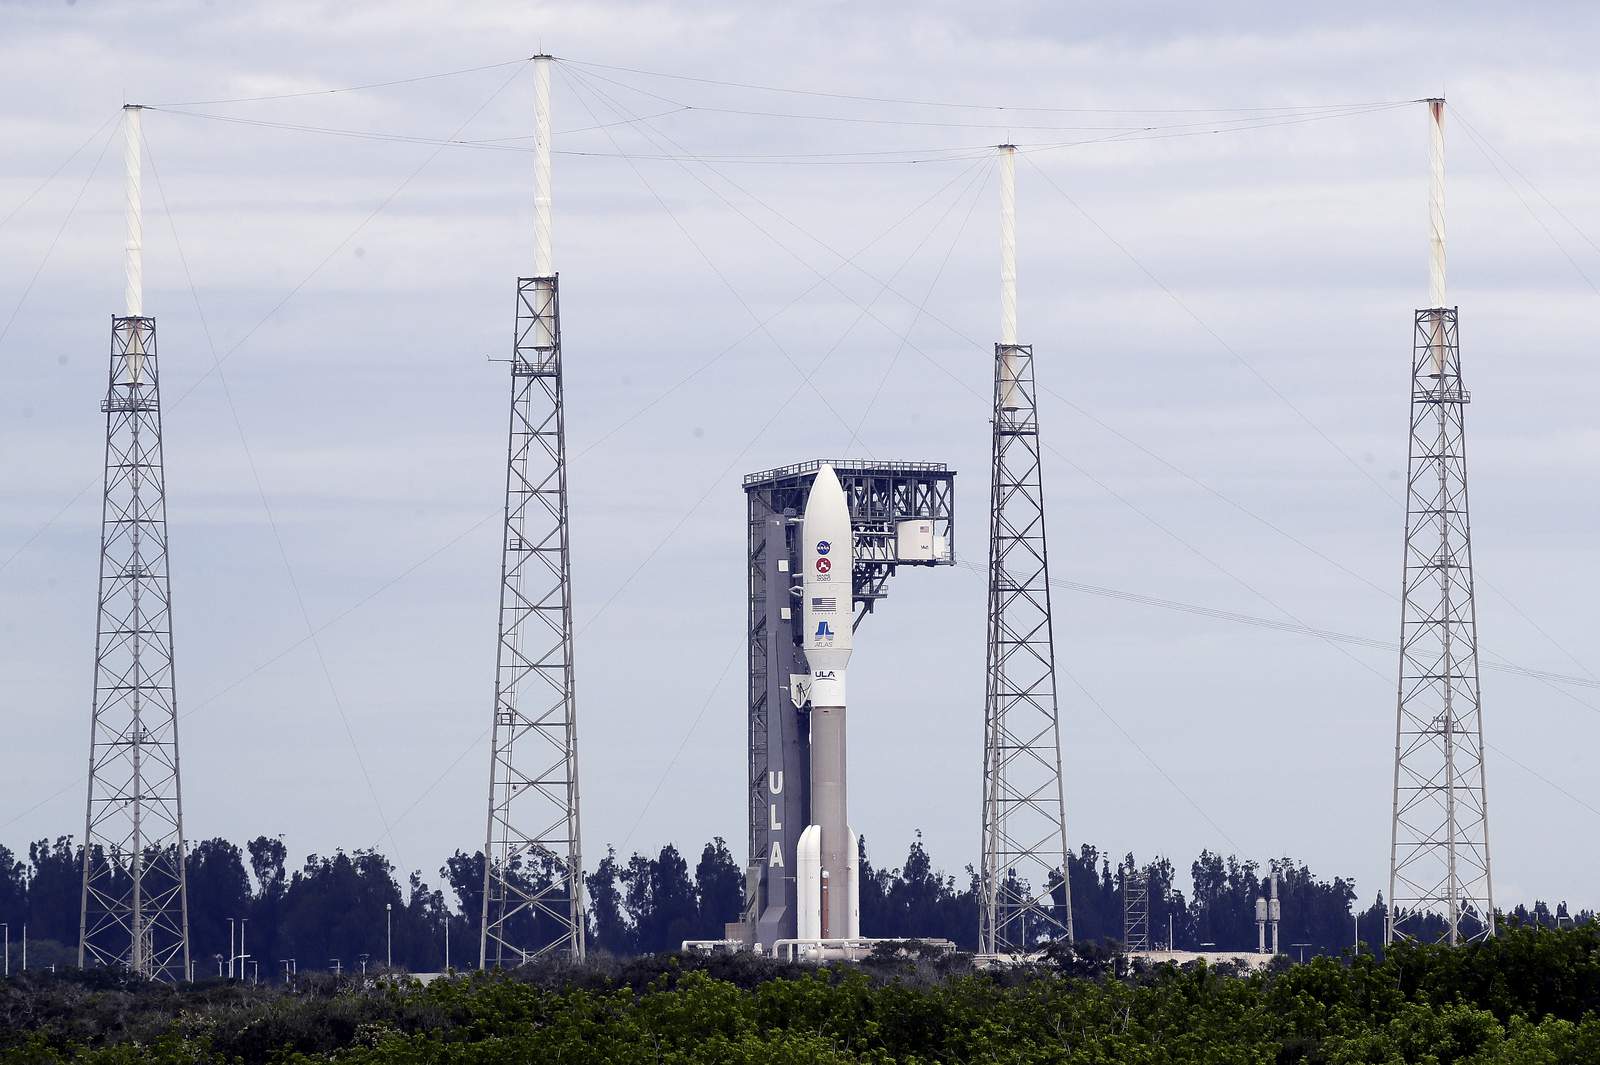 Atlas V rocket launch scheduled in Florida for Election Day